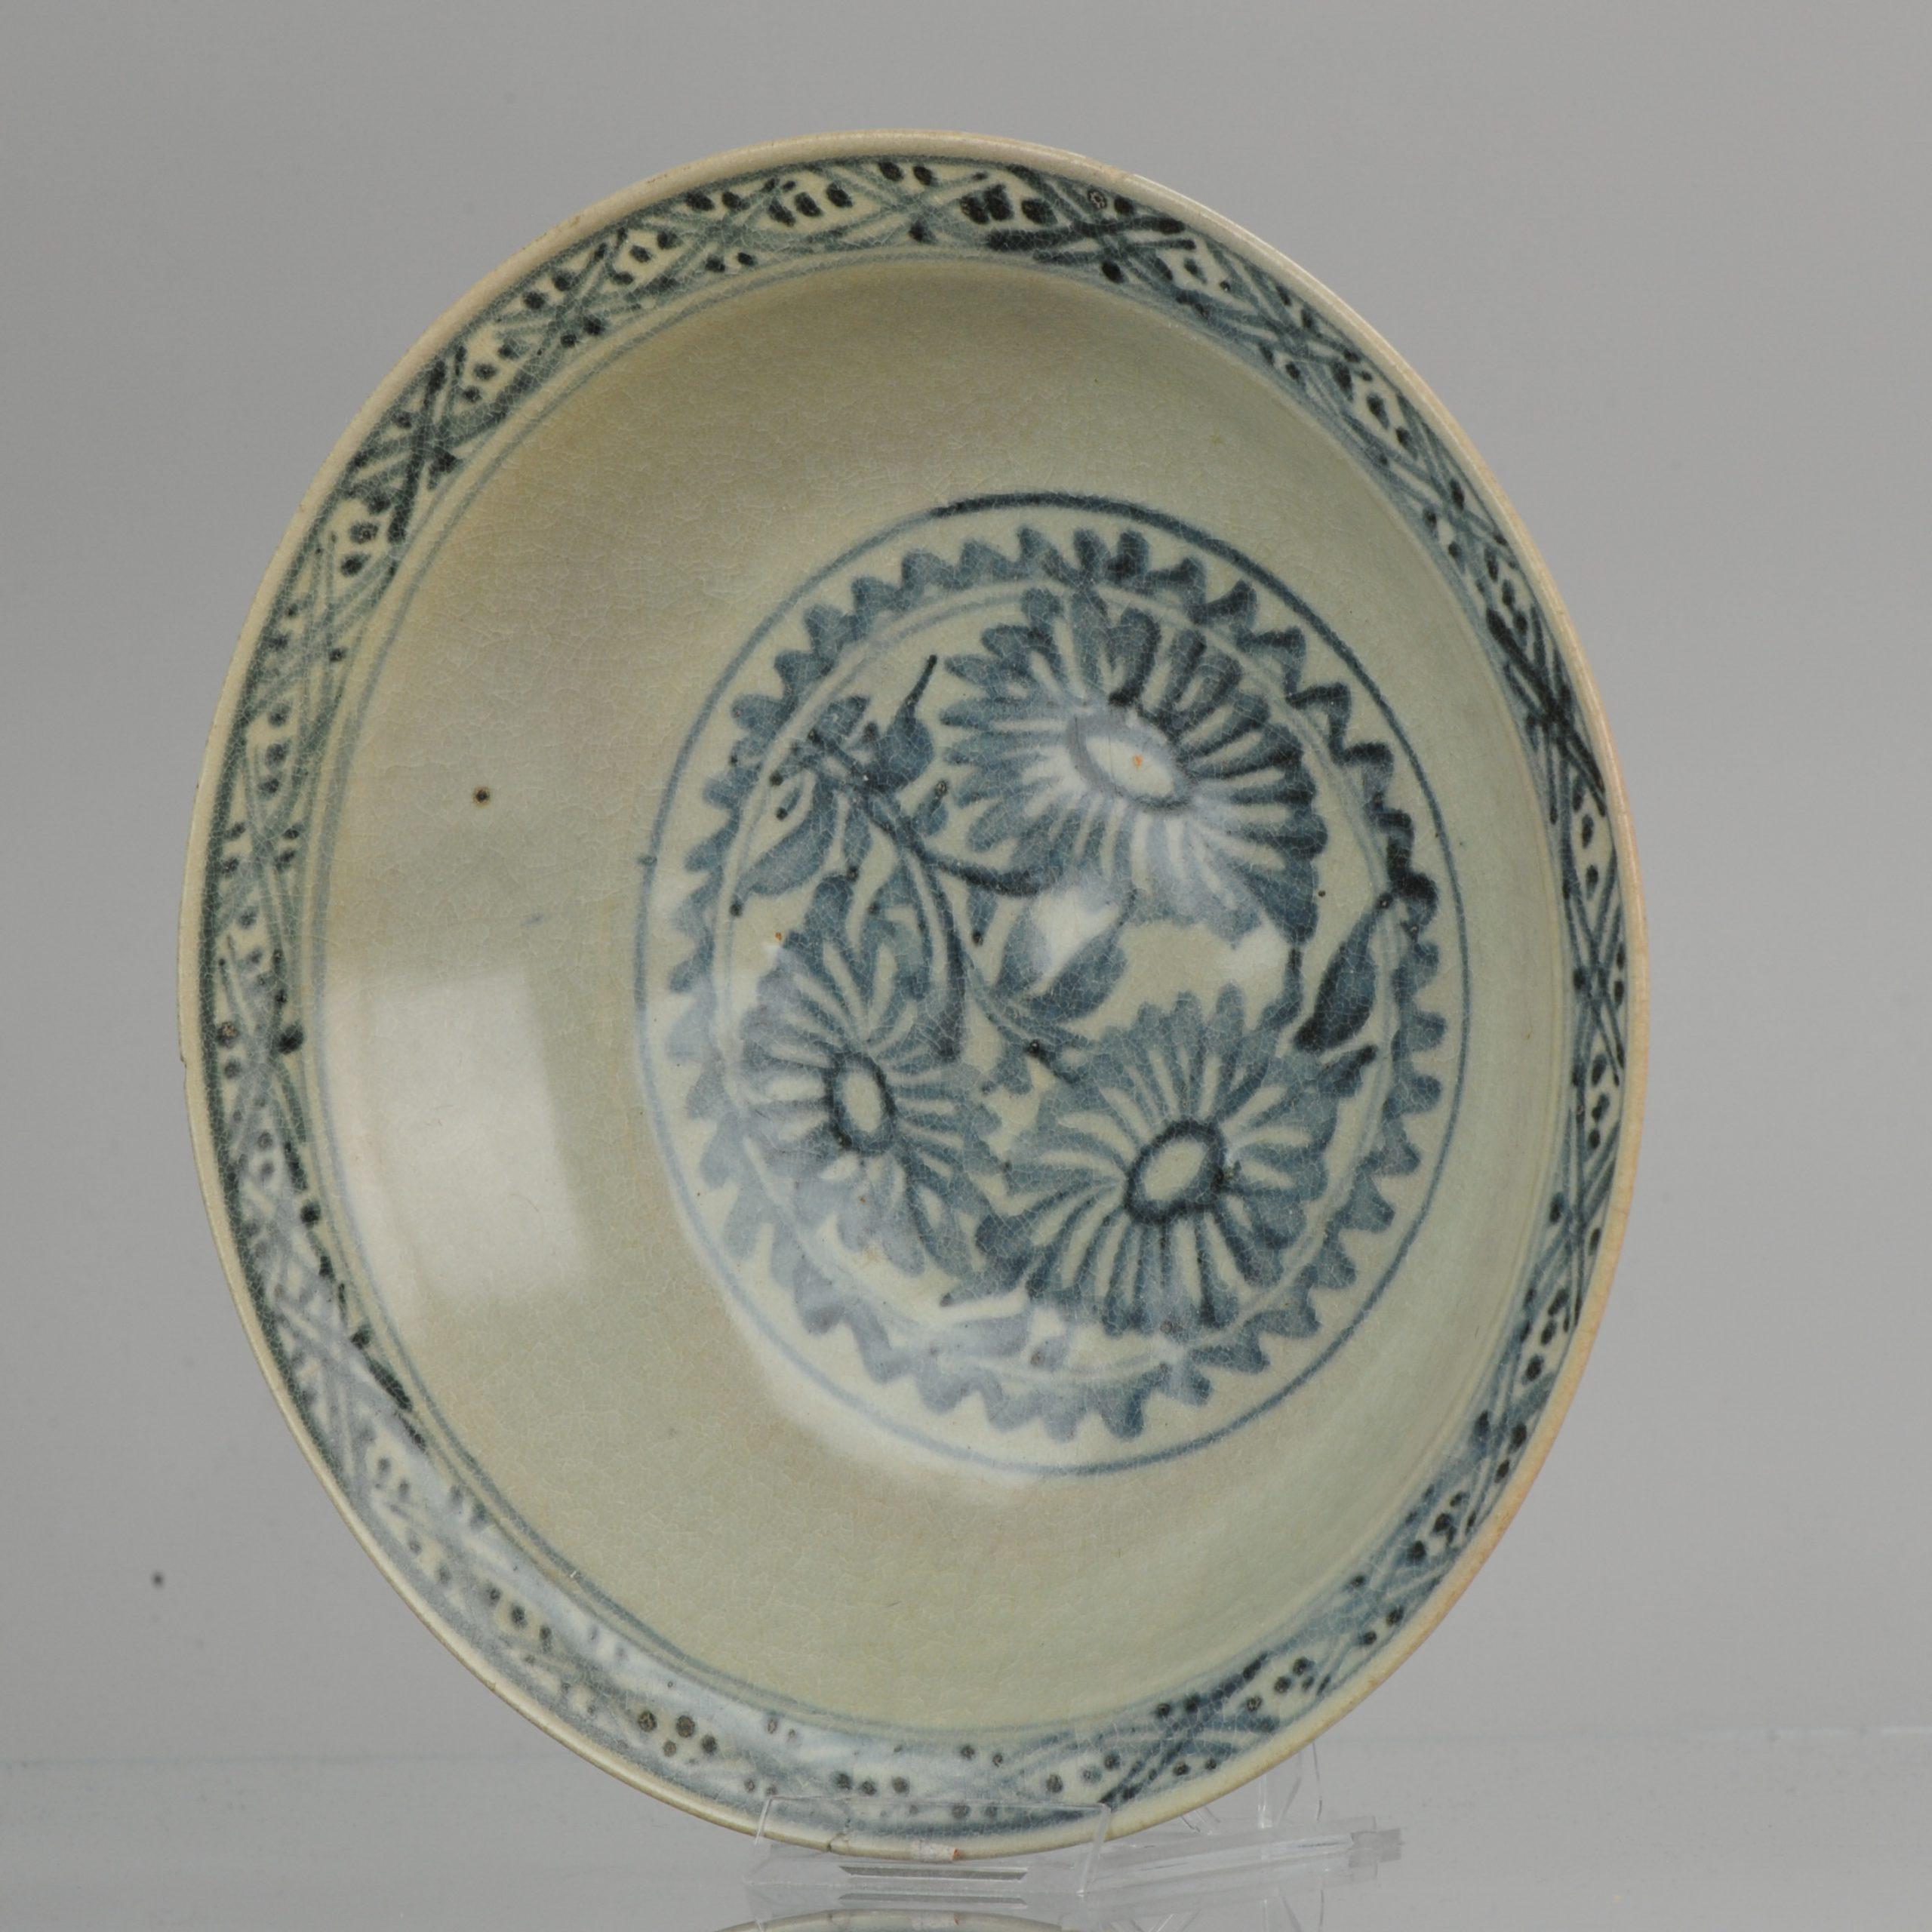 Great piece; In good condition.

Chrysantemum flowers.

 Great piece; In good condition.

A very nice and rare bowl with central scene of a bird in a landscape.
Condition
Overall condition 3 chips/frits to rim. 258 x 65mm
Period
16th